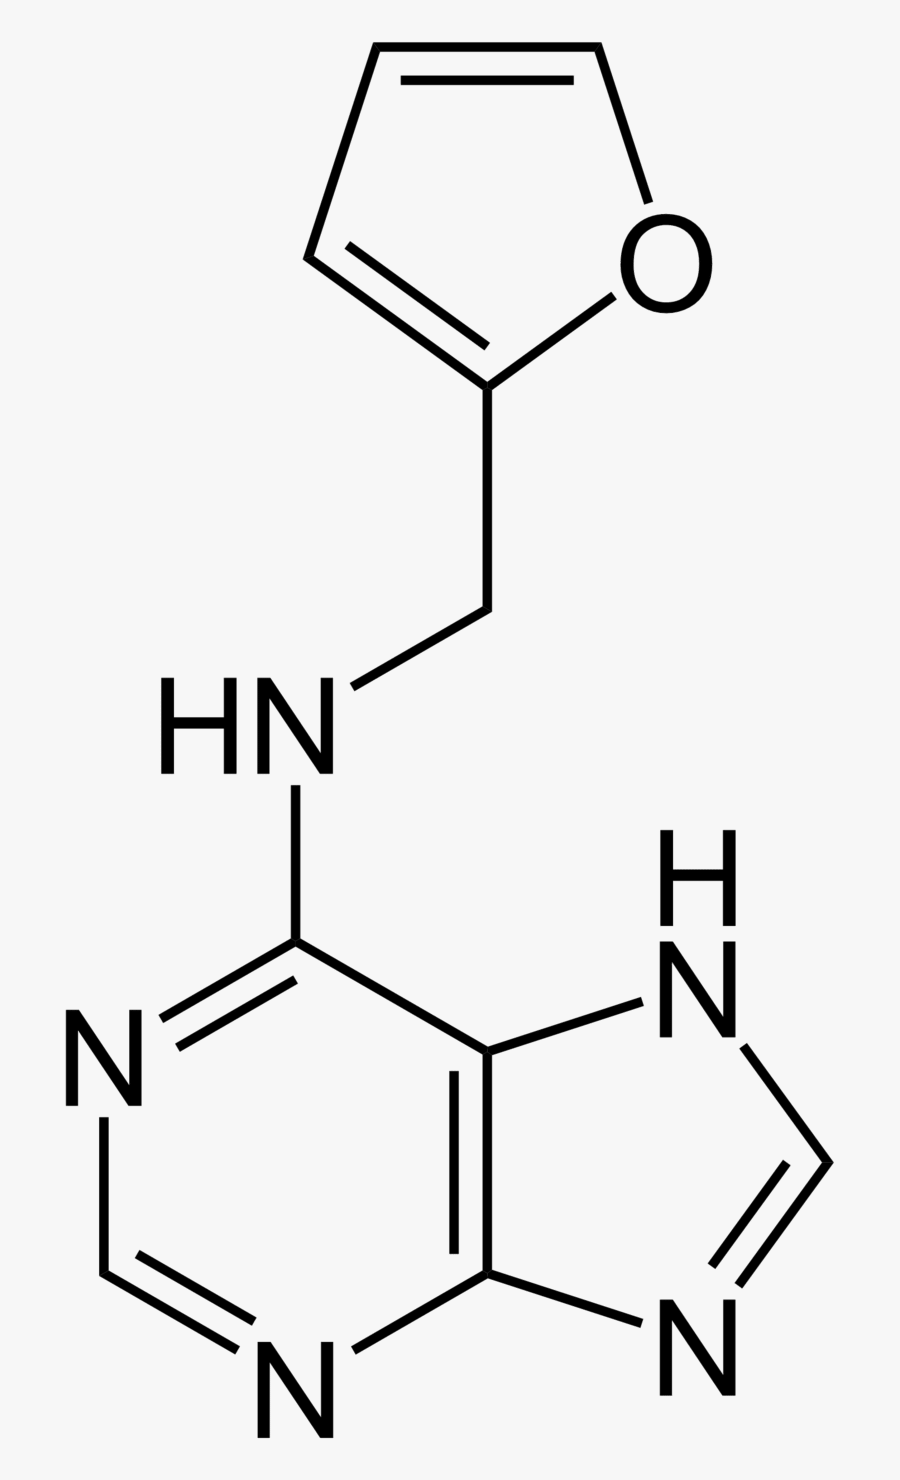 Chemical Structure Of Kinetin, A Plant Growth Hormone - Purine, Transparent Clipart